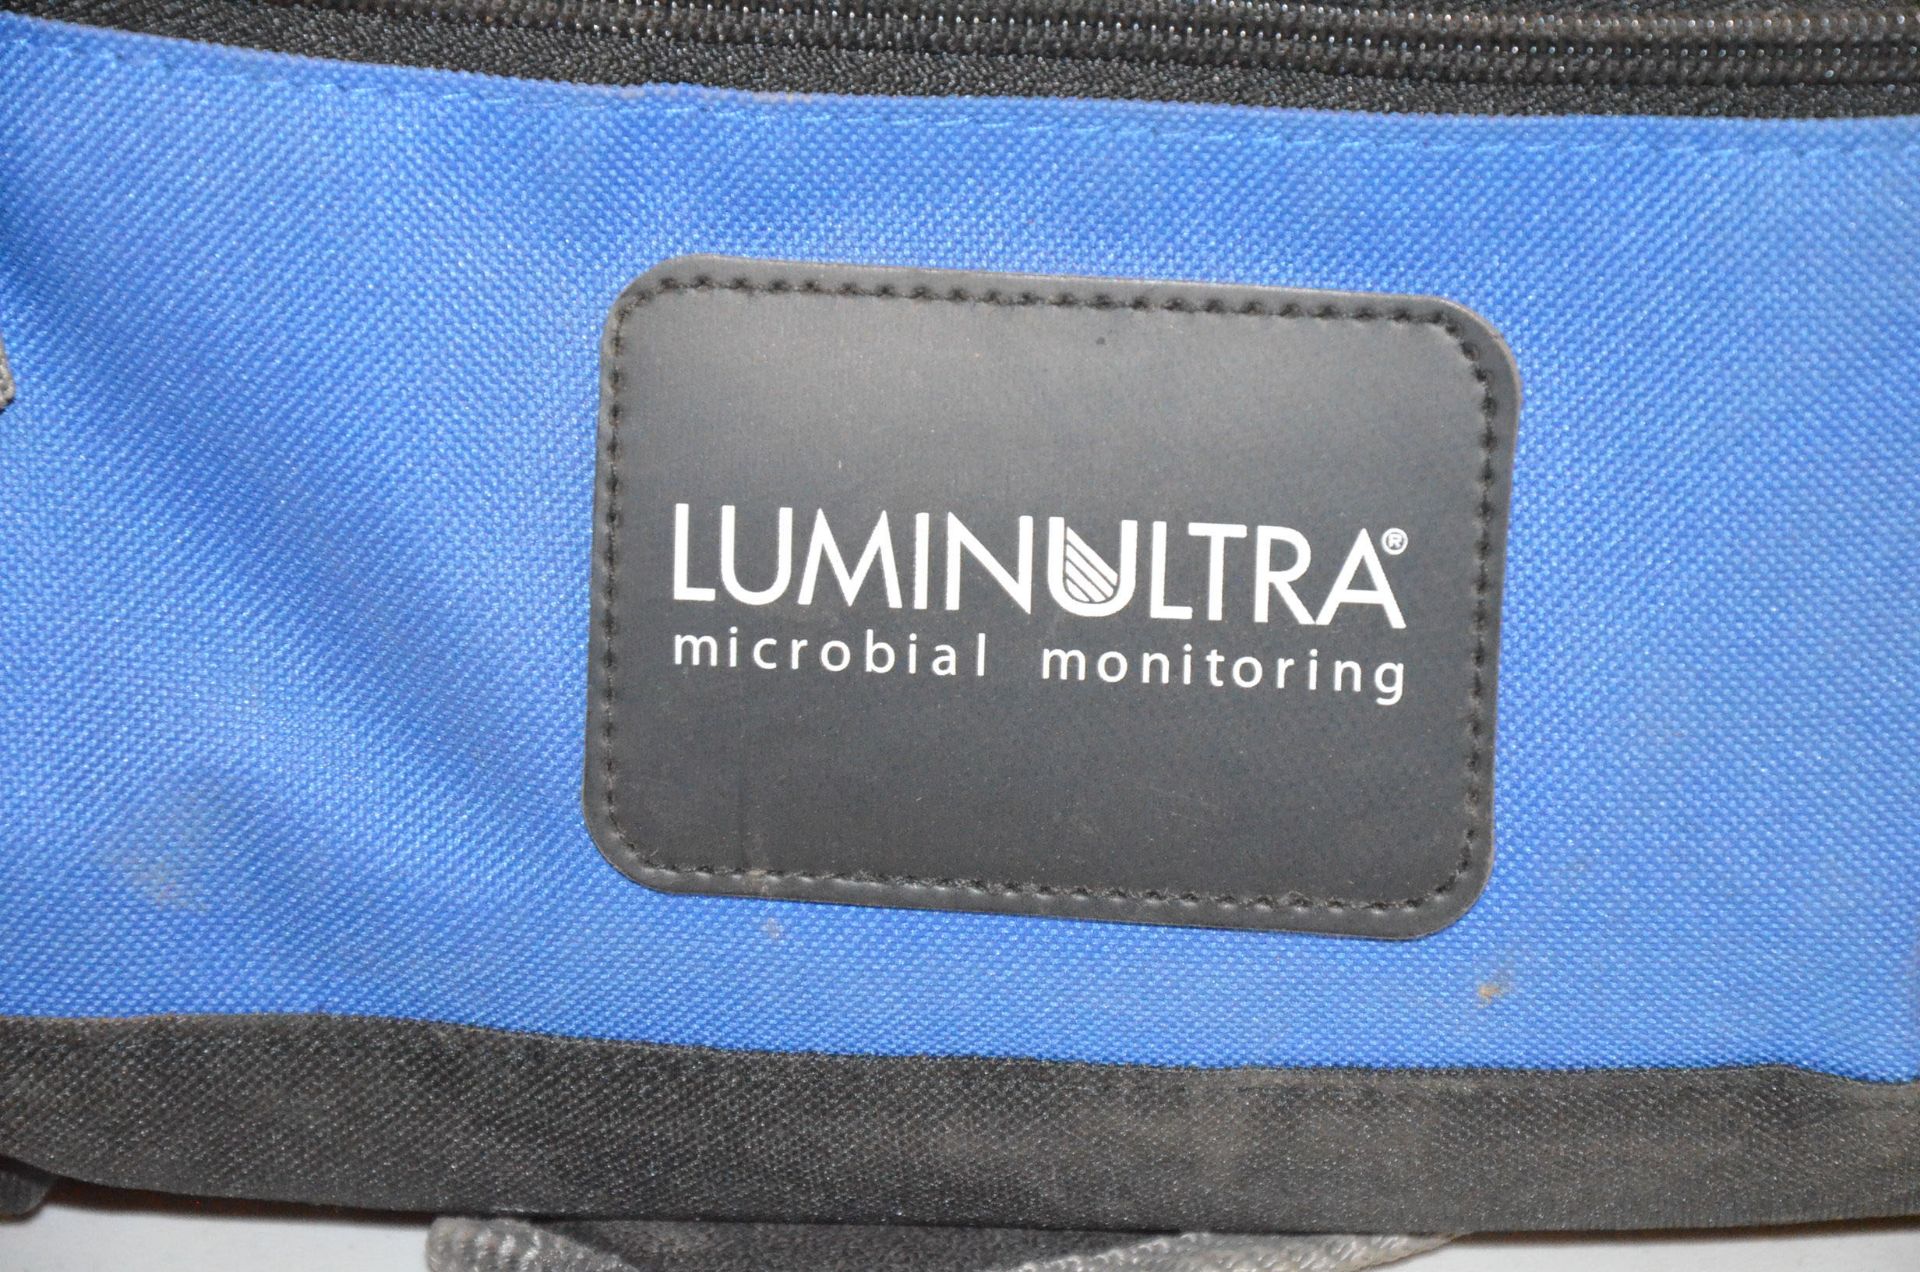 LUMINULTRA MICROBIAL MONITORING AND TESTING KIT, S/N N/A - Image 2 of 4